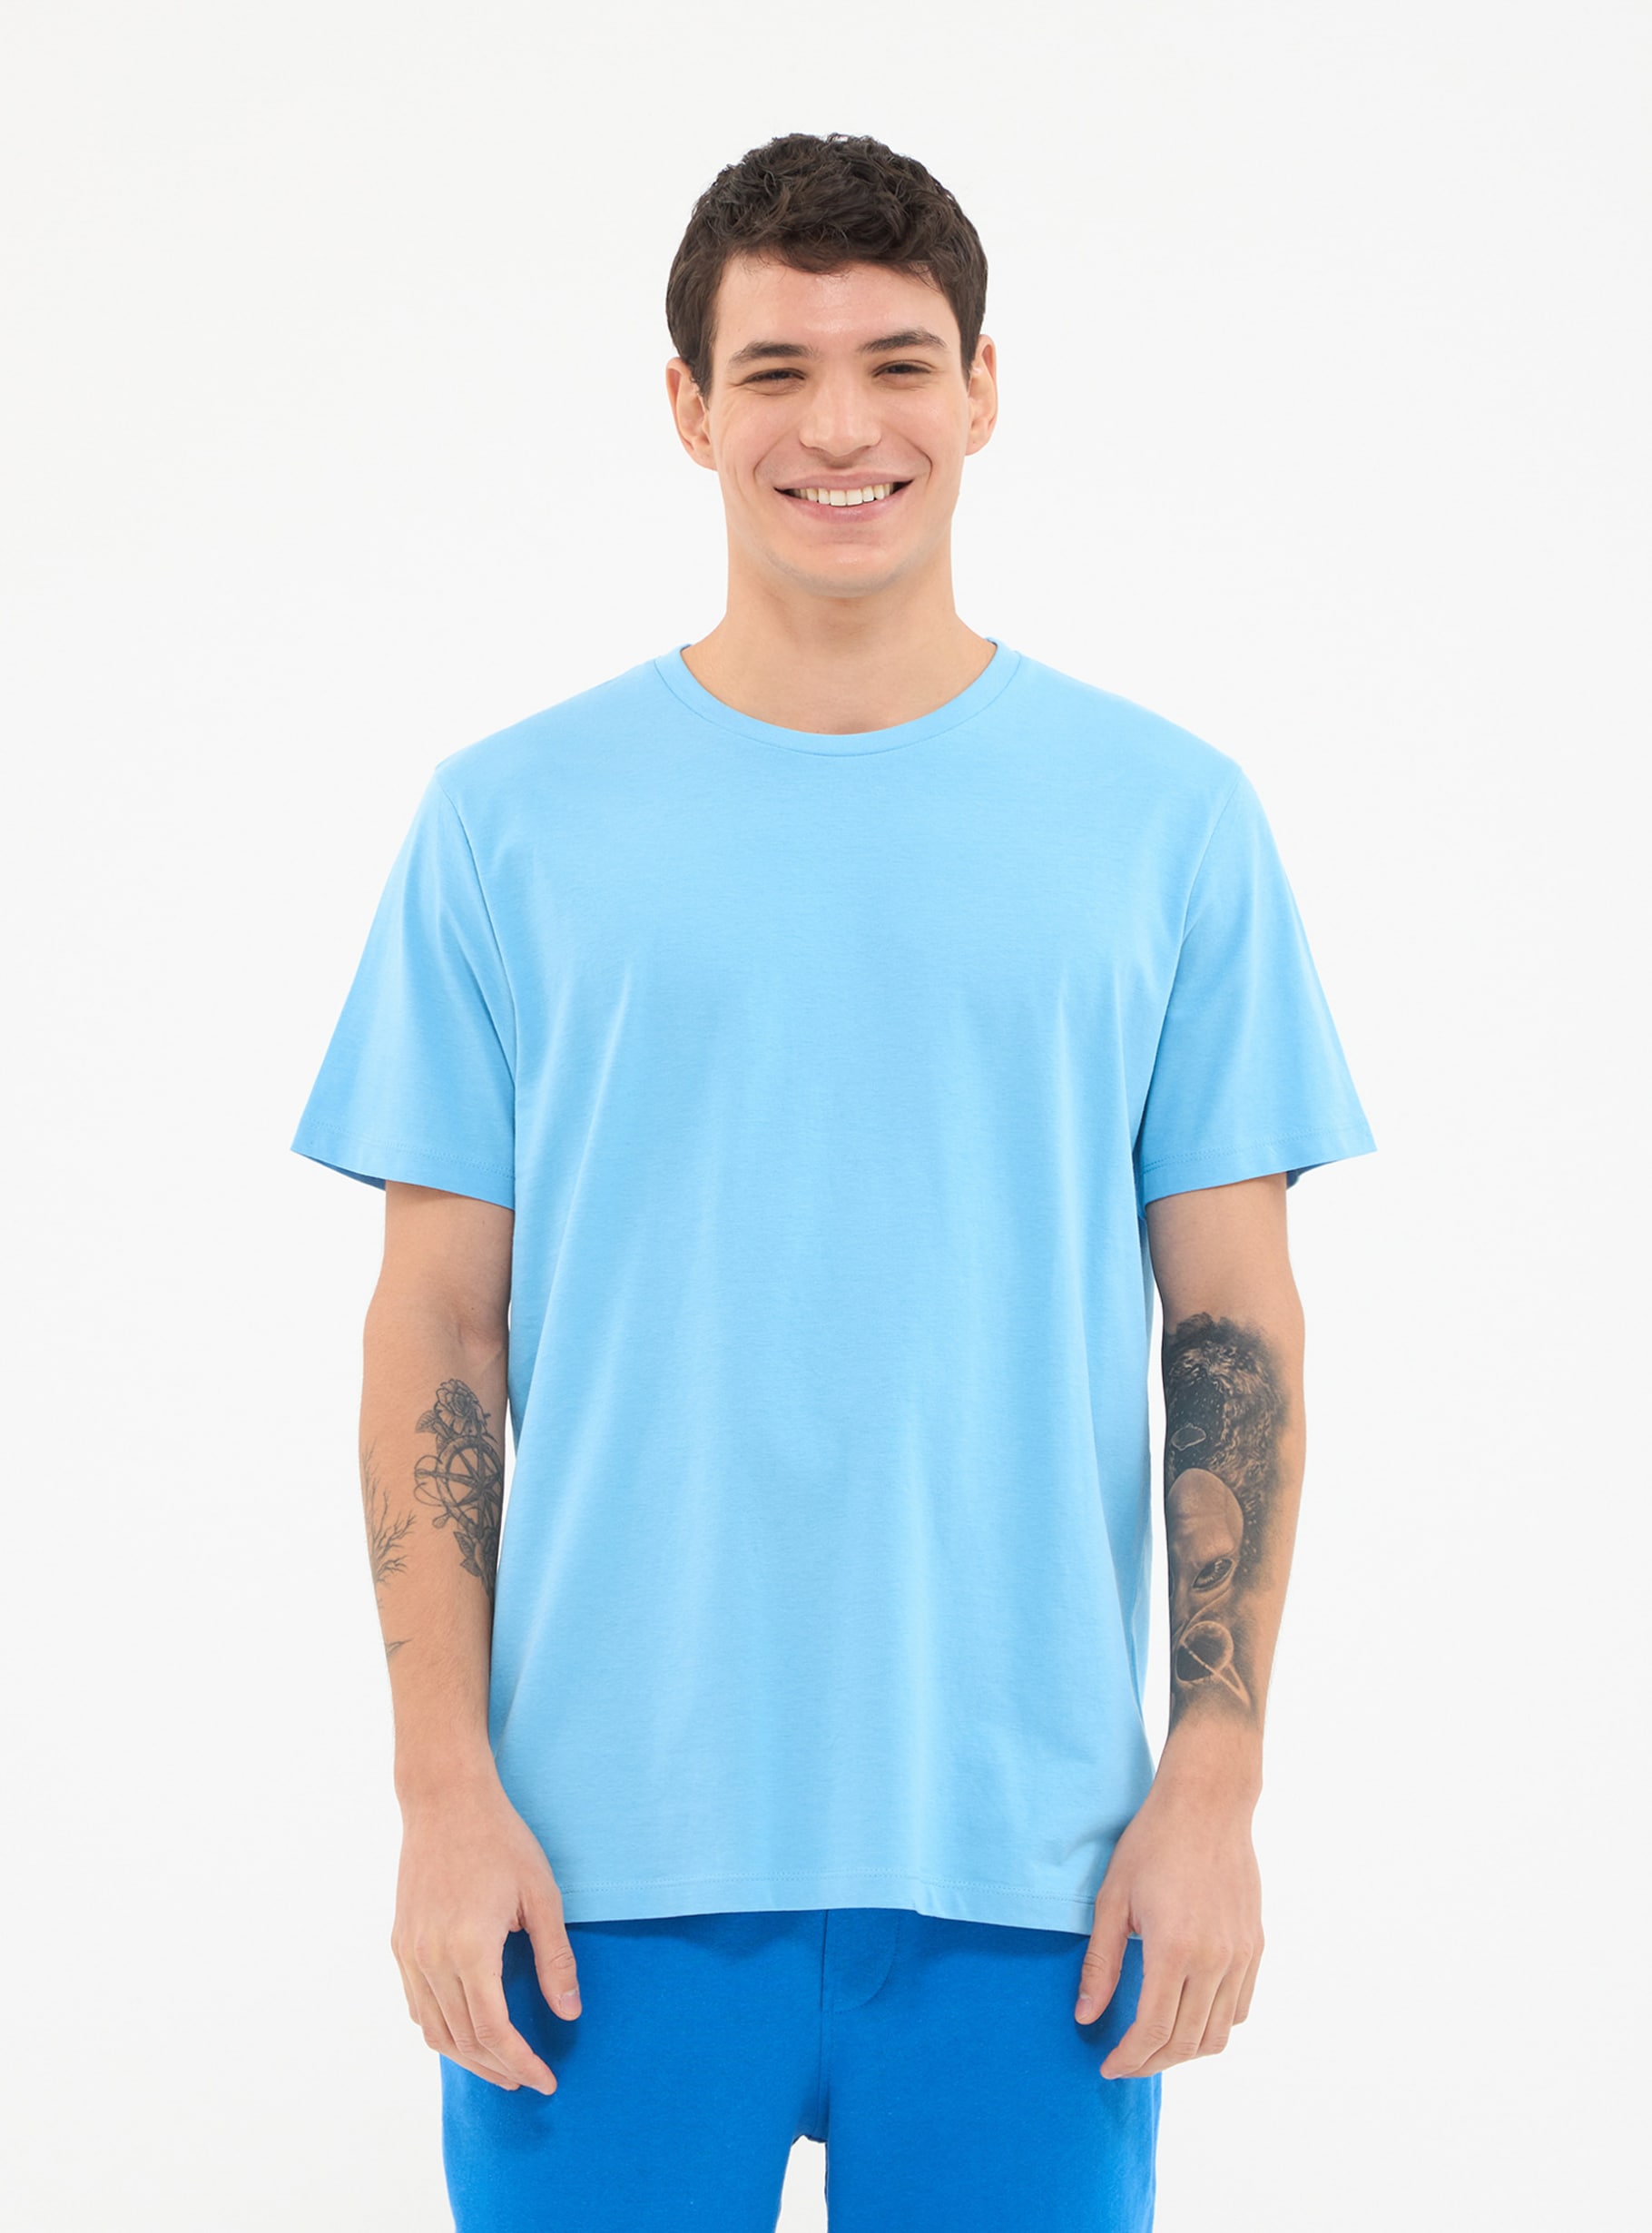 10 Best T-Shirts With Color For Men 2021, 51% OFF